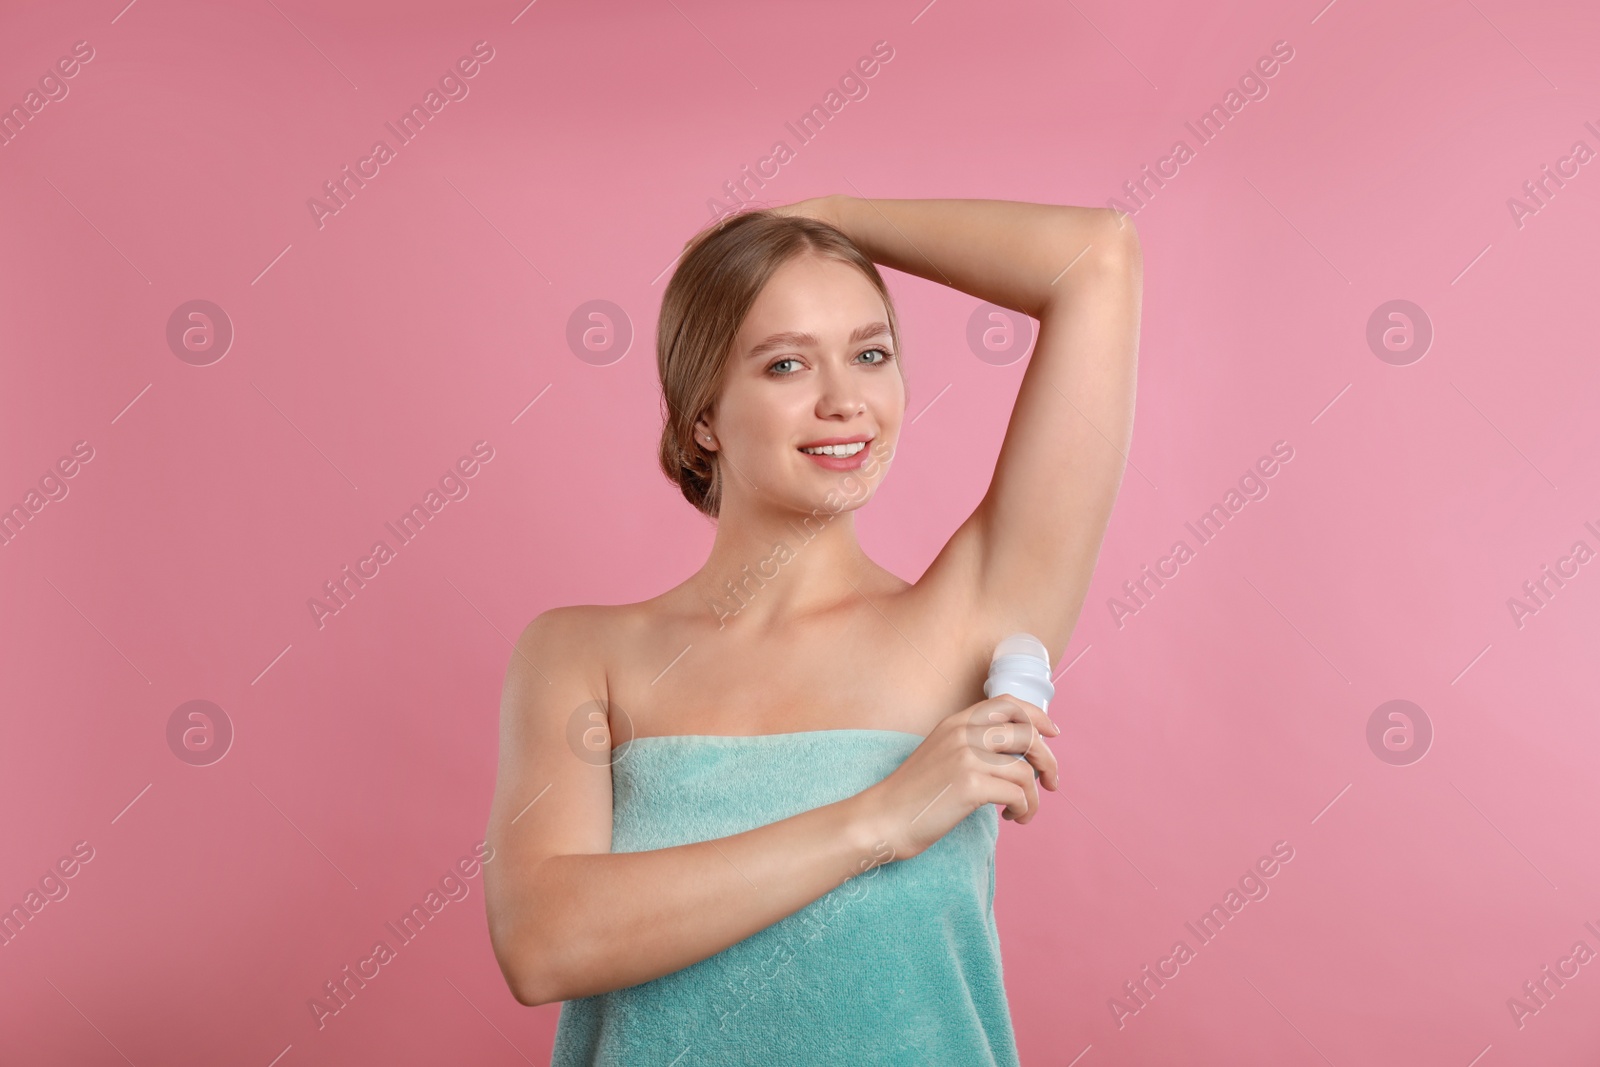 Photo of Young woman applying deodorant to armpit on pink background